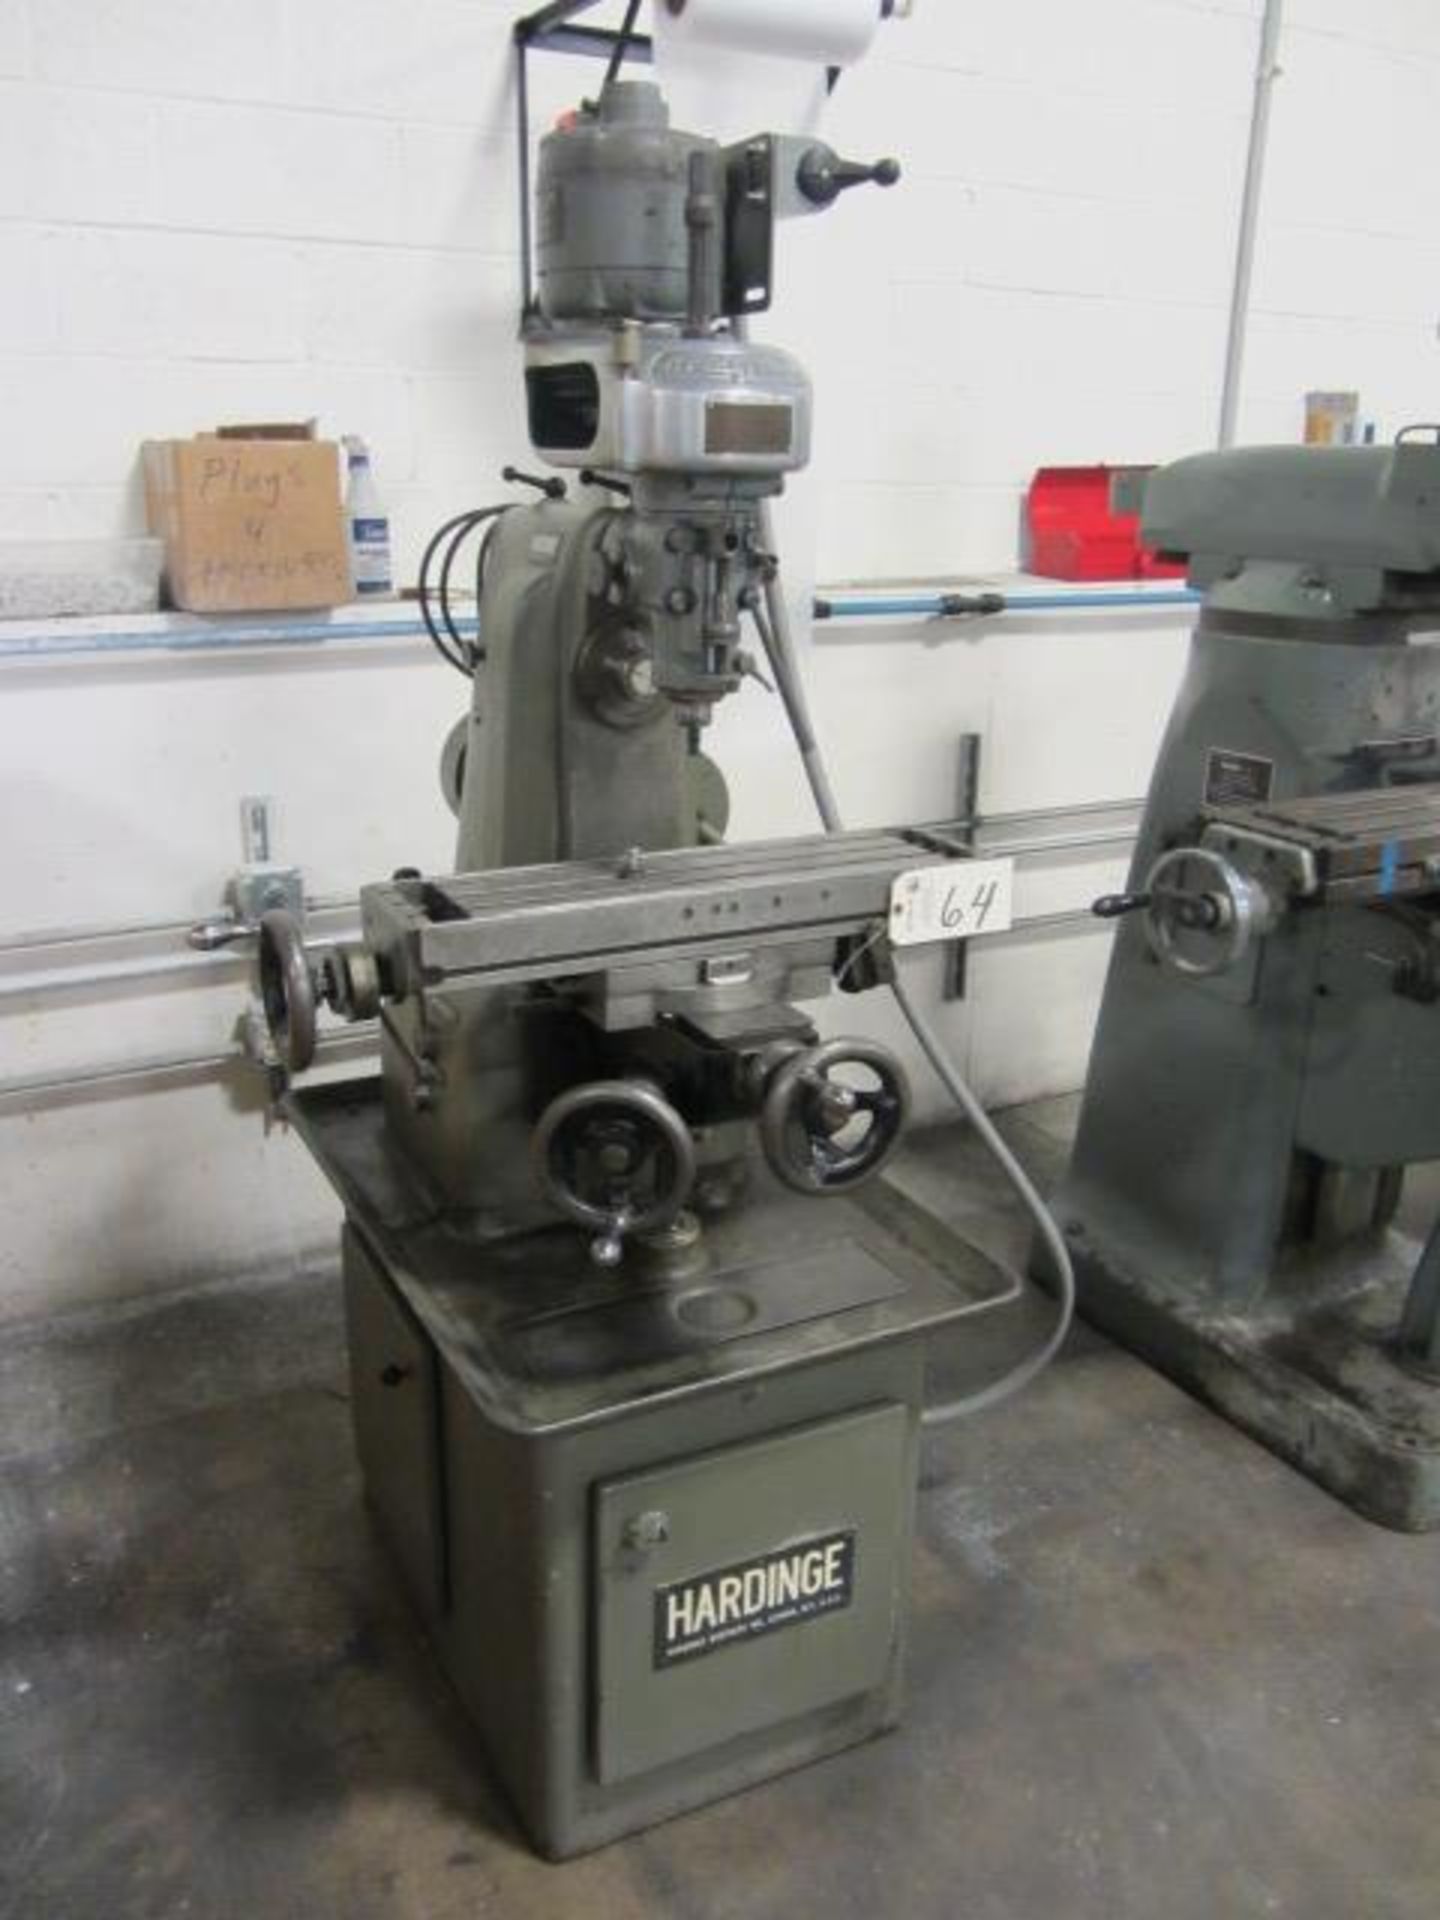 Hardinge Vertical Mill with 24'' x 6'' Table, Bridgeport Head with Speeds to 4250 PRM, R-8